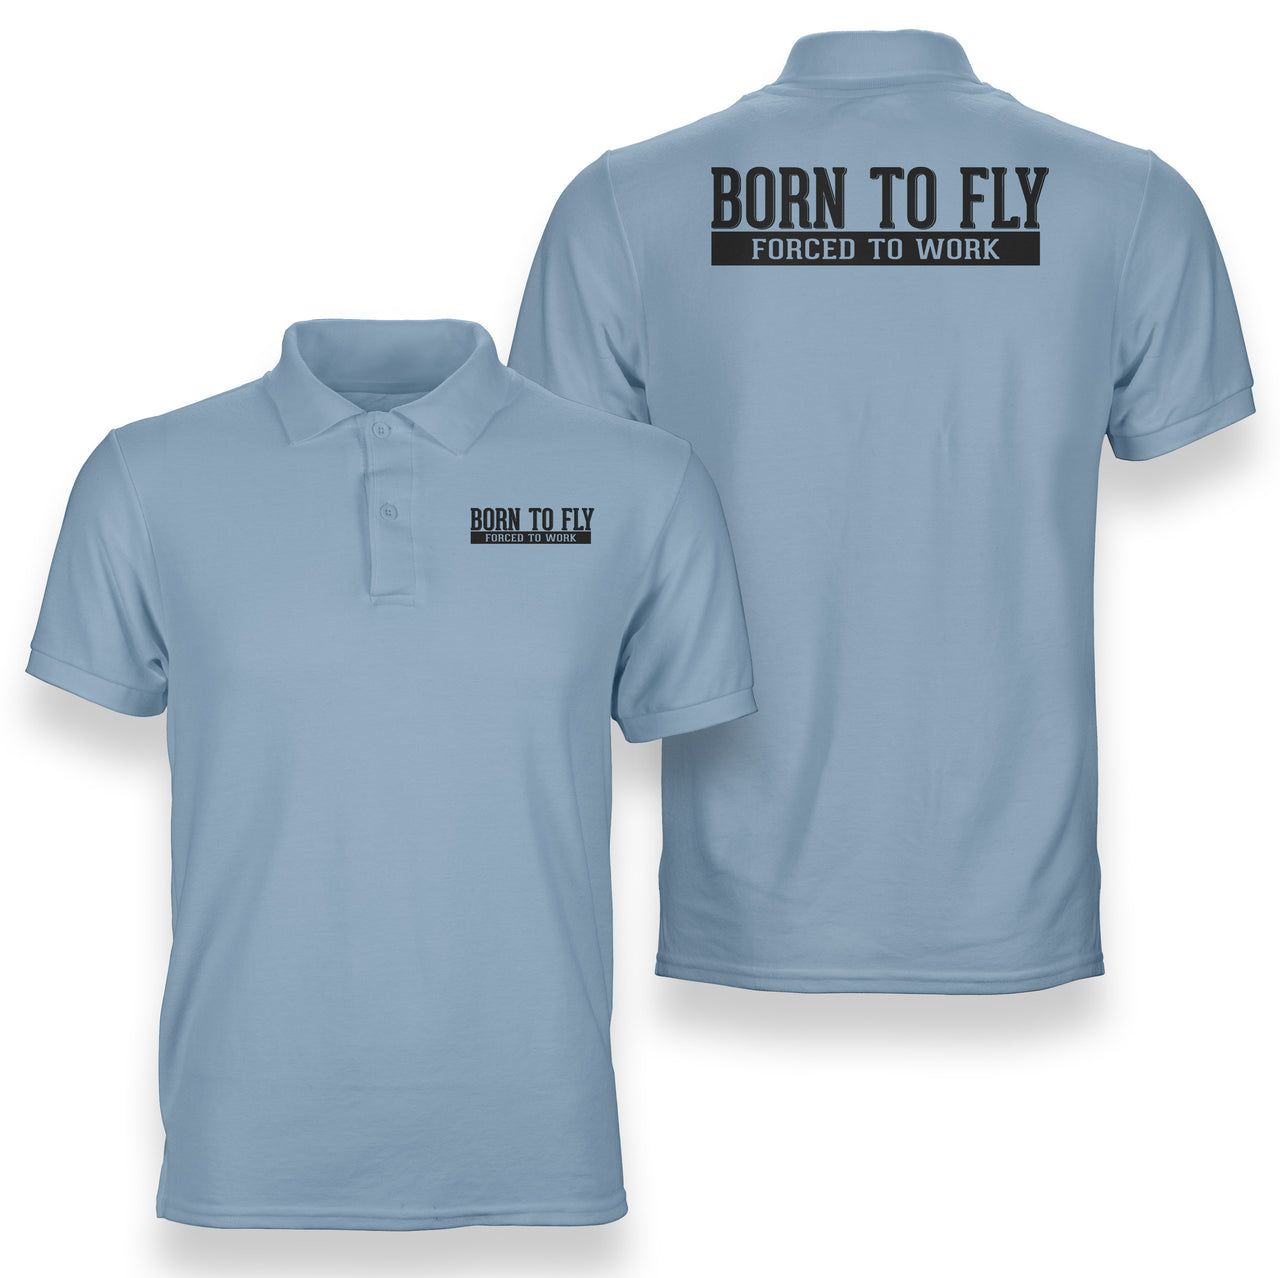 Born To Fly Forced To Work Designed Double Side Polo T-Shirts